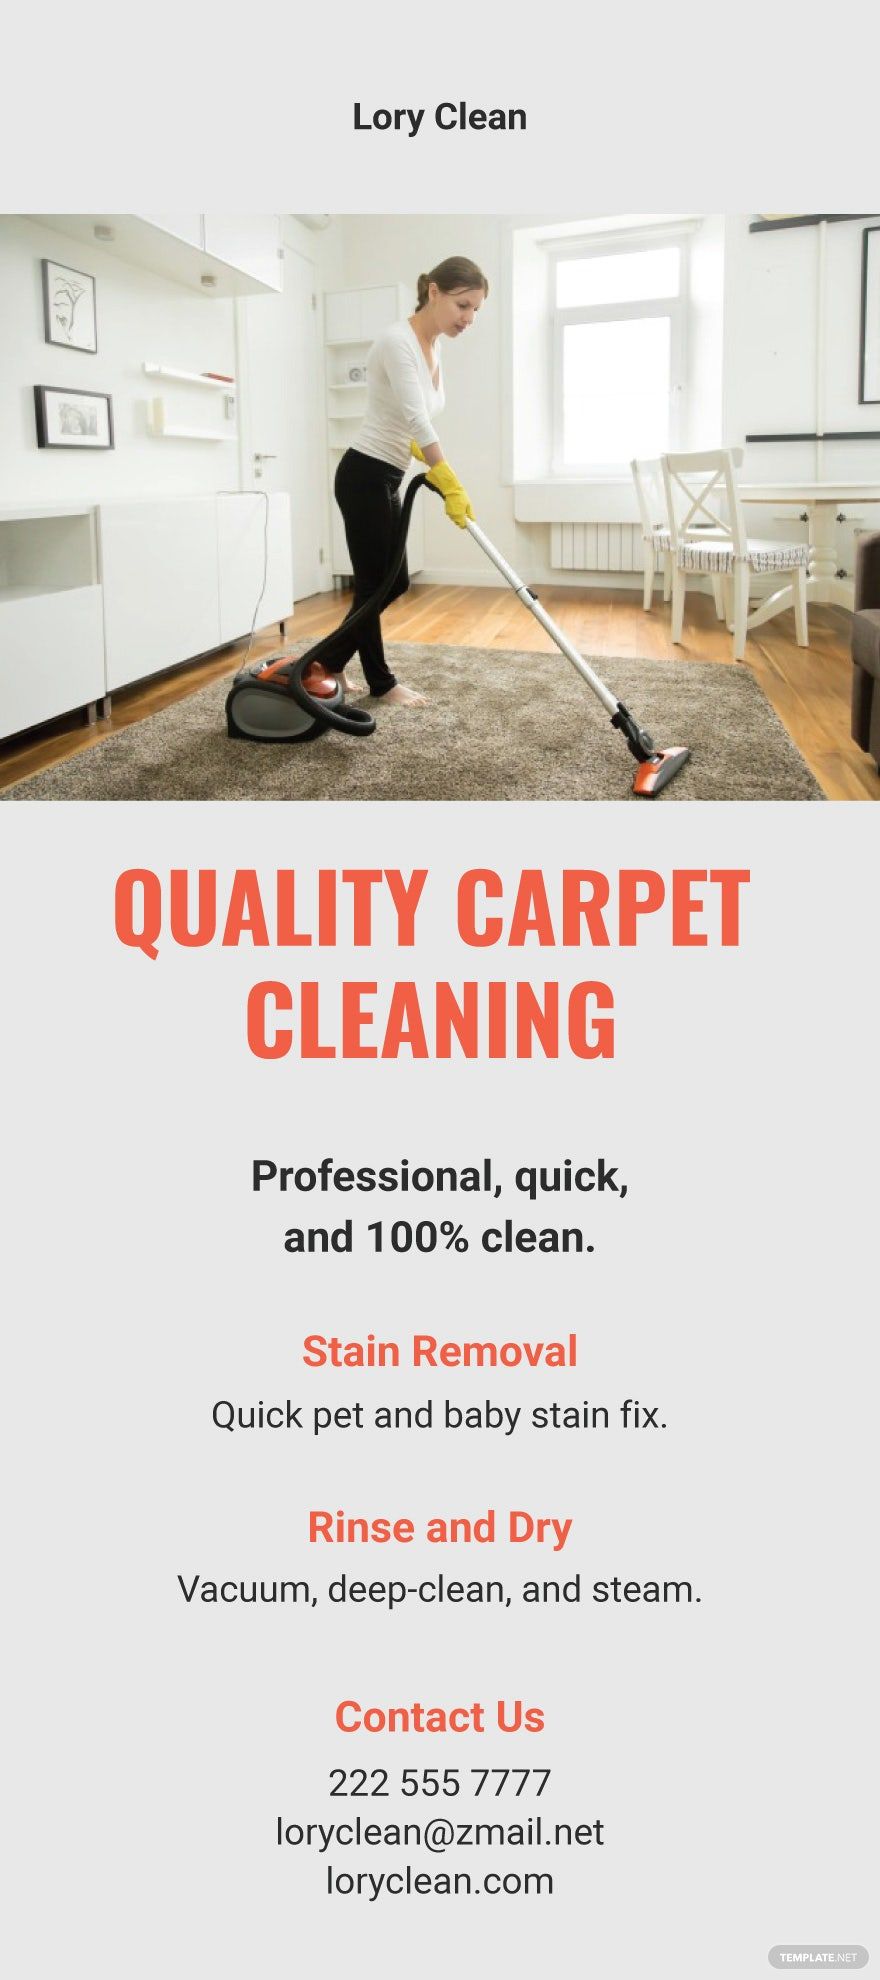 Carpet Cleaning Services DL Card Template in Word, Google Docs, Apple Pages, Publisher